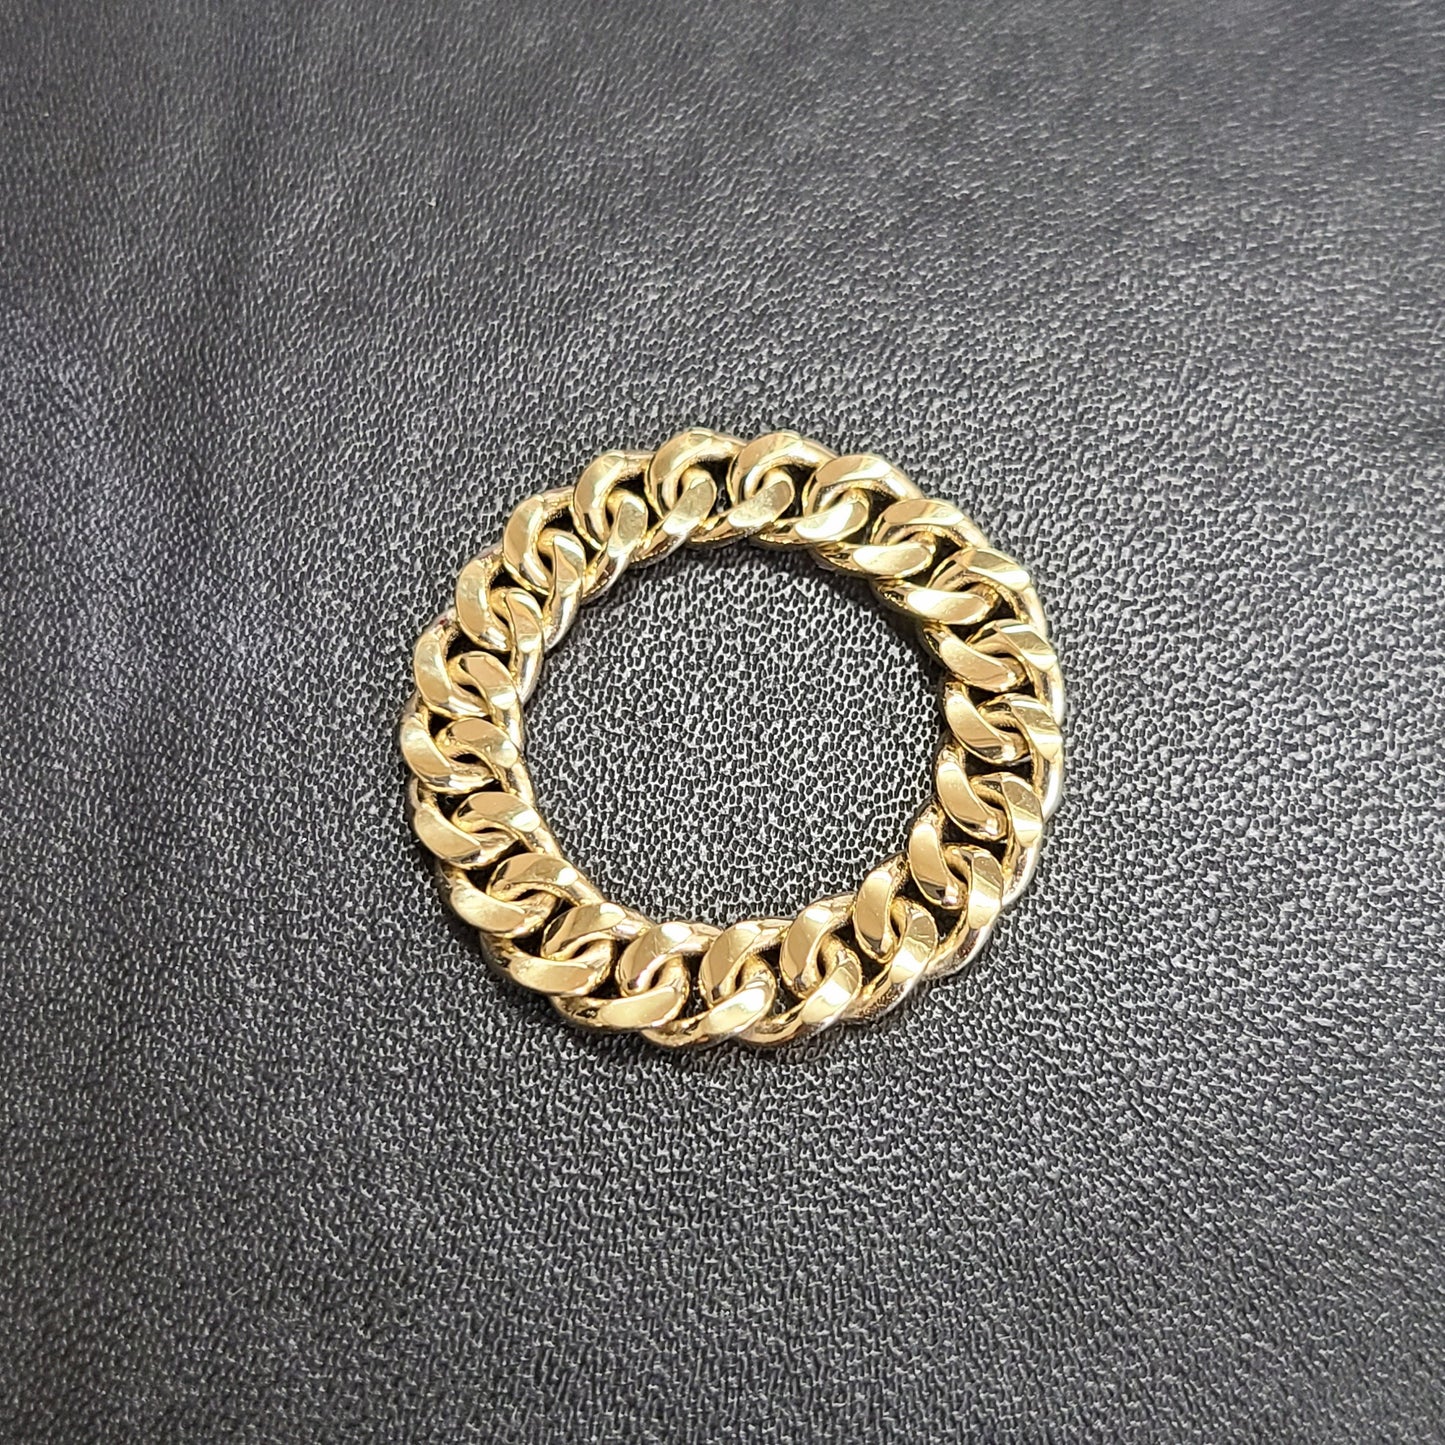 Handmade Gold Cuban Link Ring / 14K Solid Gold  Chain Ring / Gold Chain link Ring /Stackable Gold Cuban Link Ring /Chain Width 5.2mm